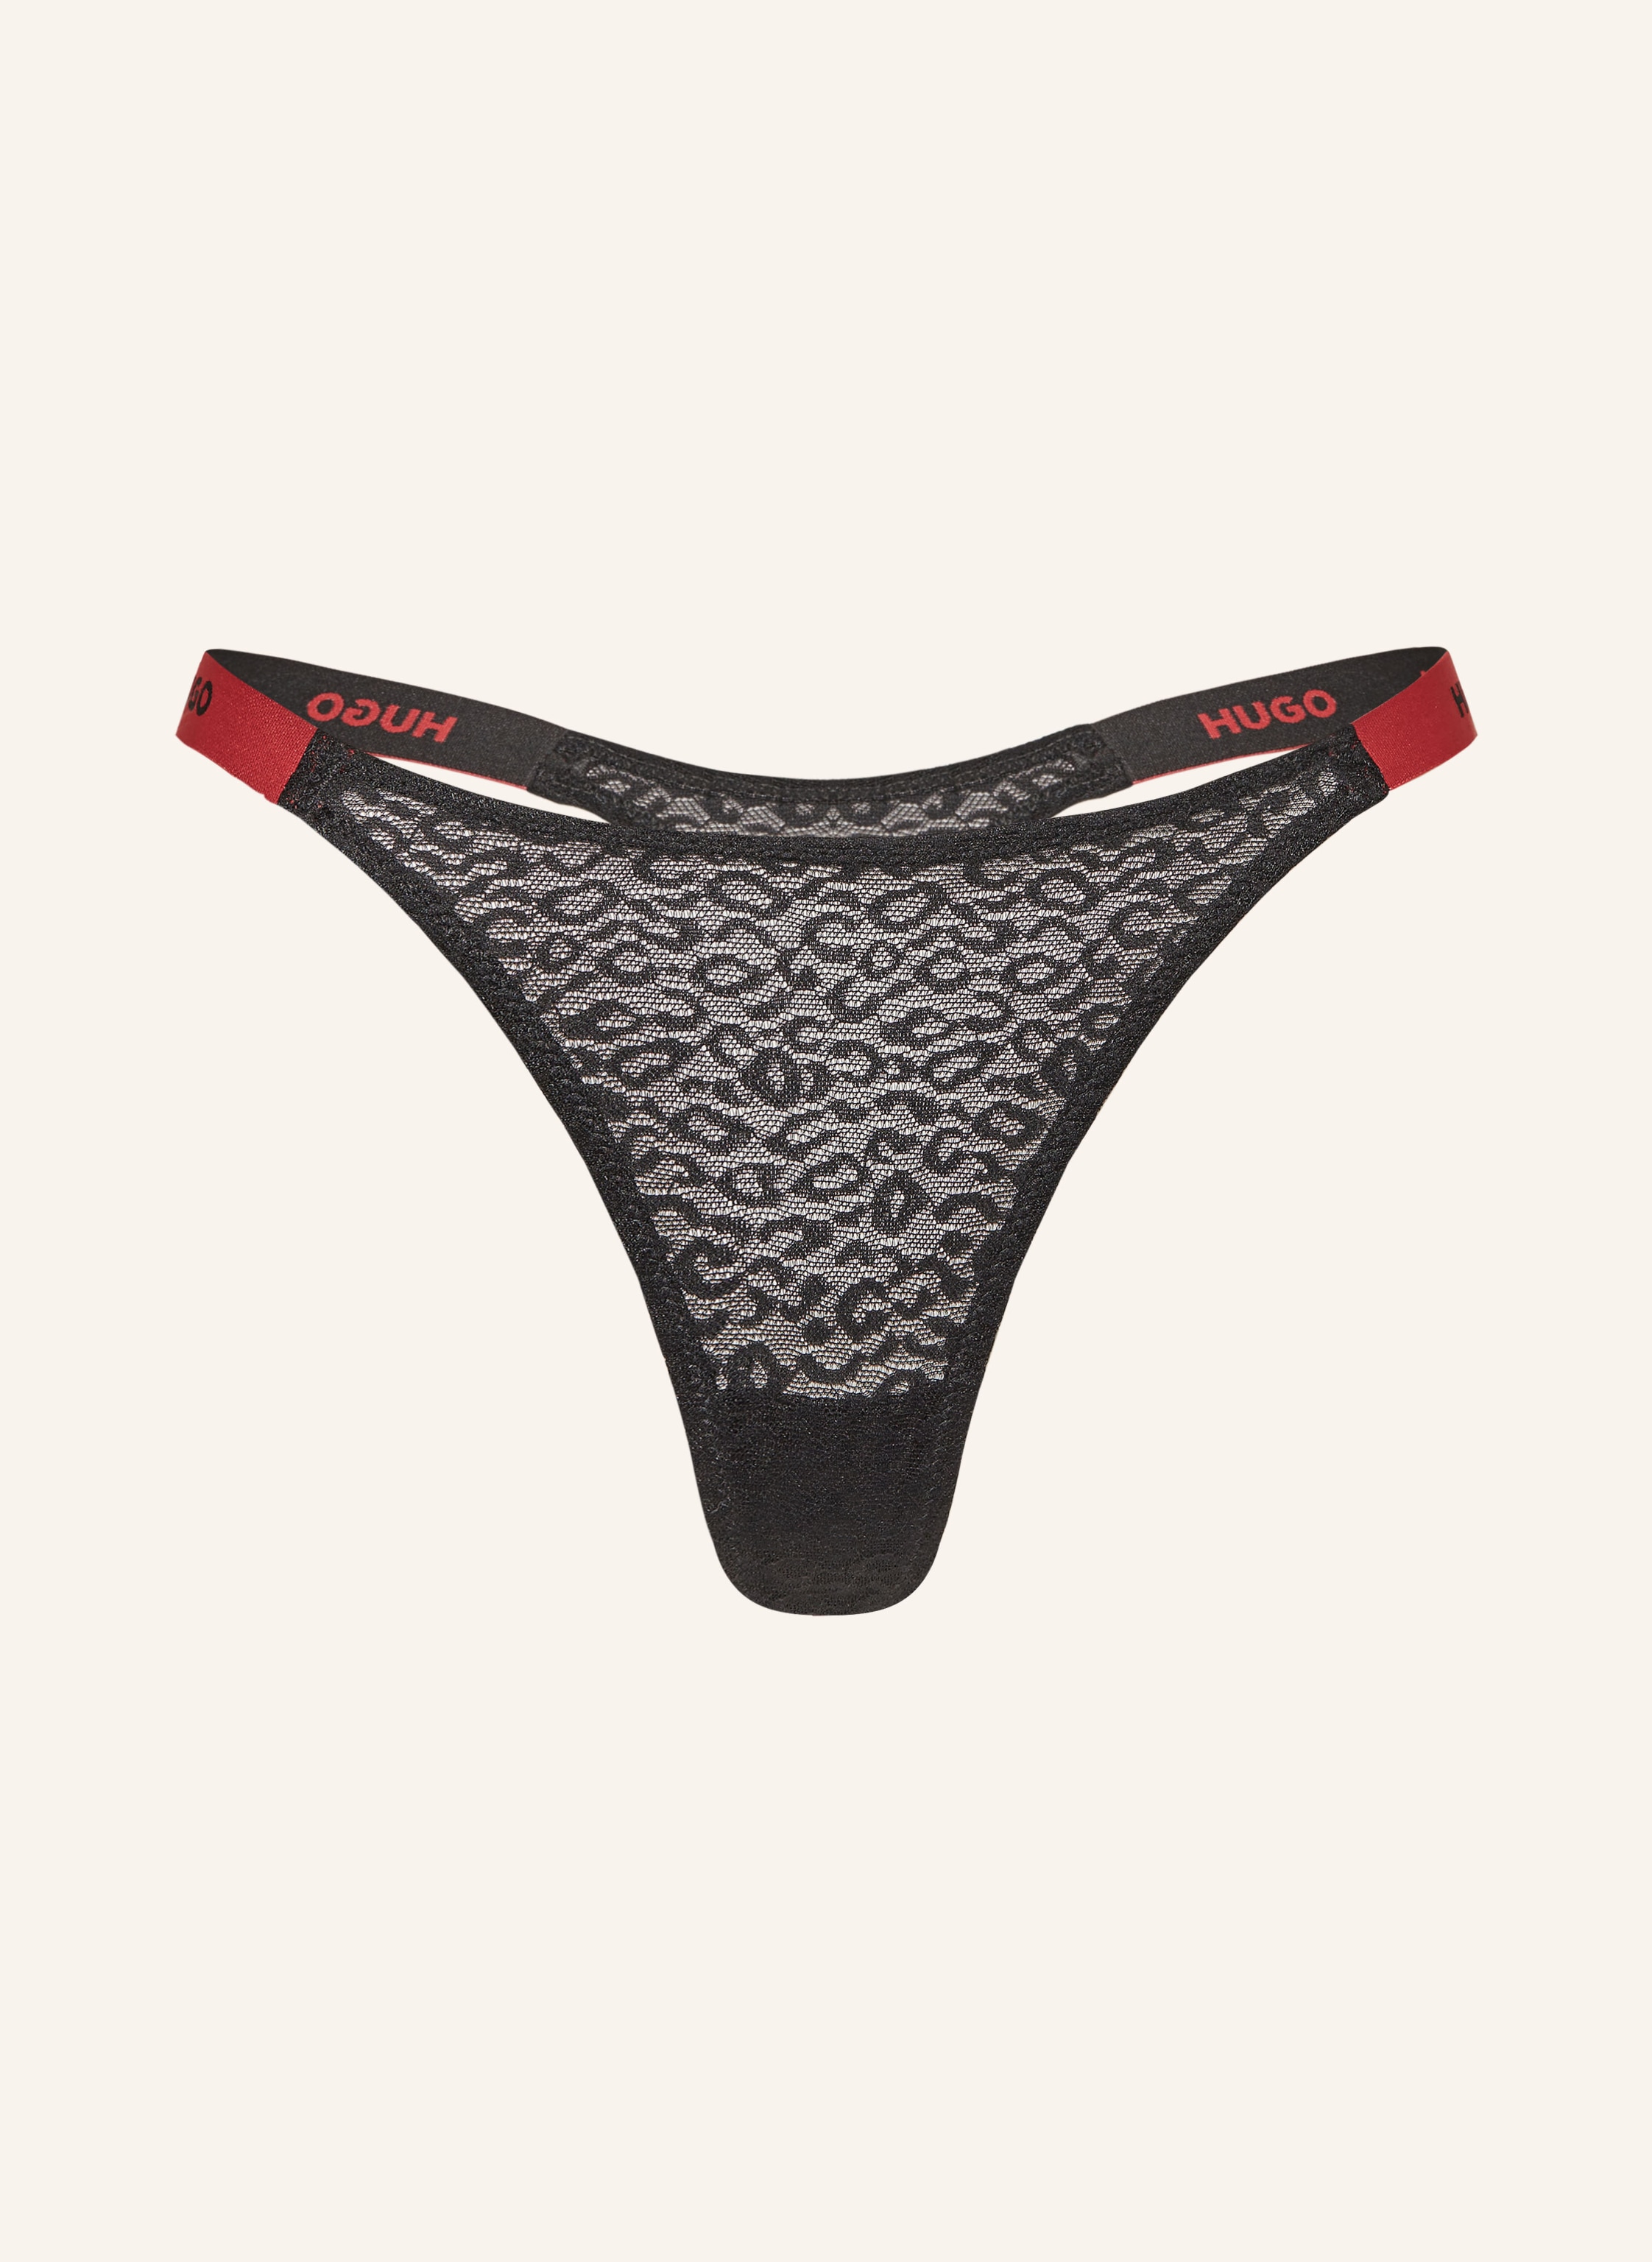 LACE red SPORTY black/ HUGO in Thong